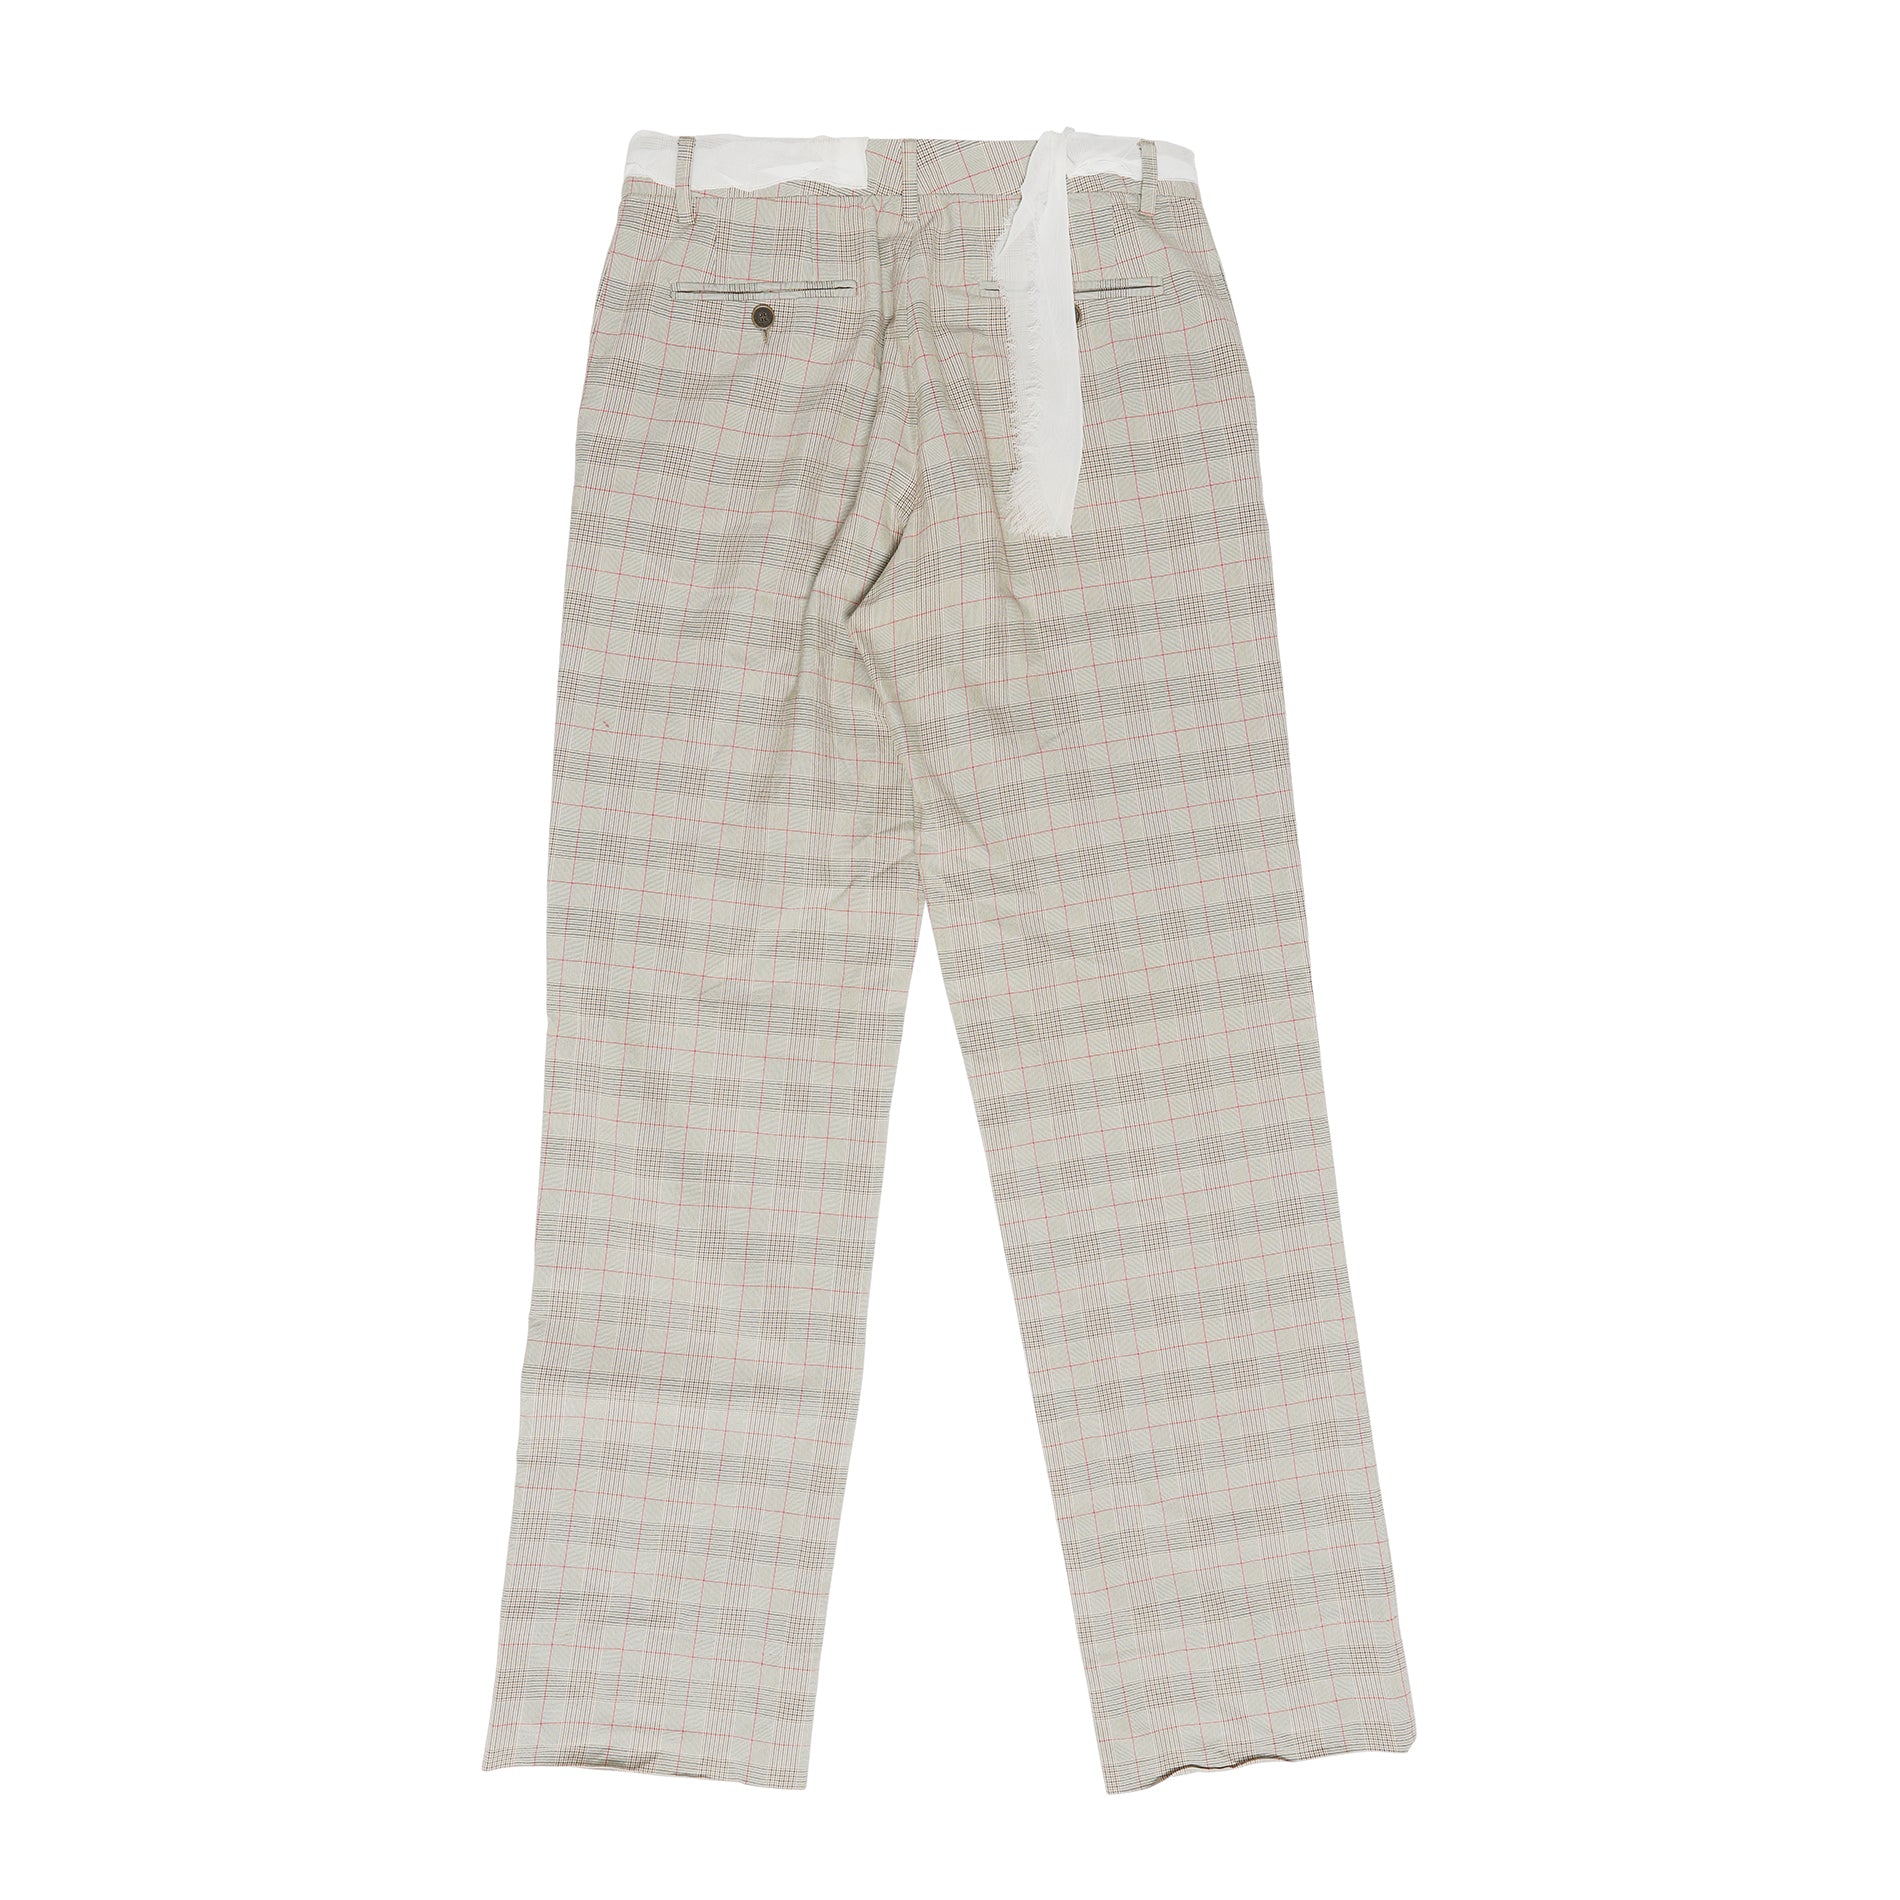 Maison Martin Margiela SS06 Tull Belted Reconstructed Plaid Pants